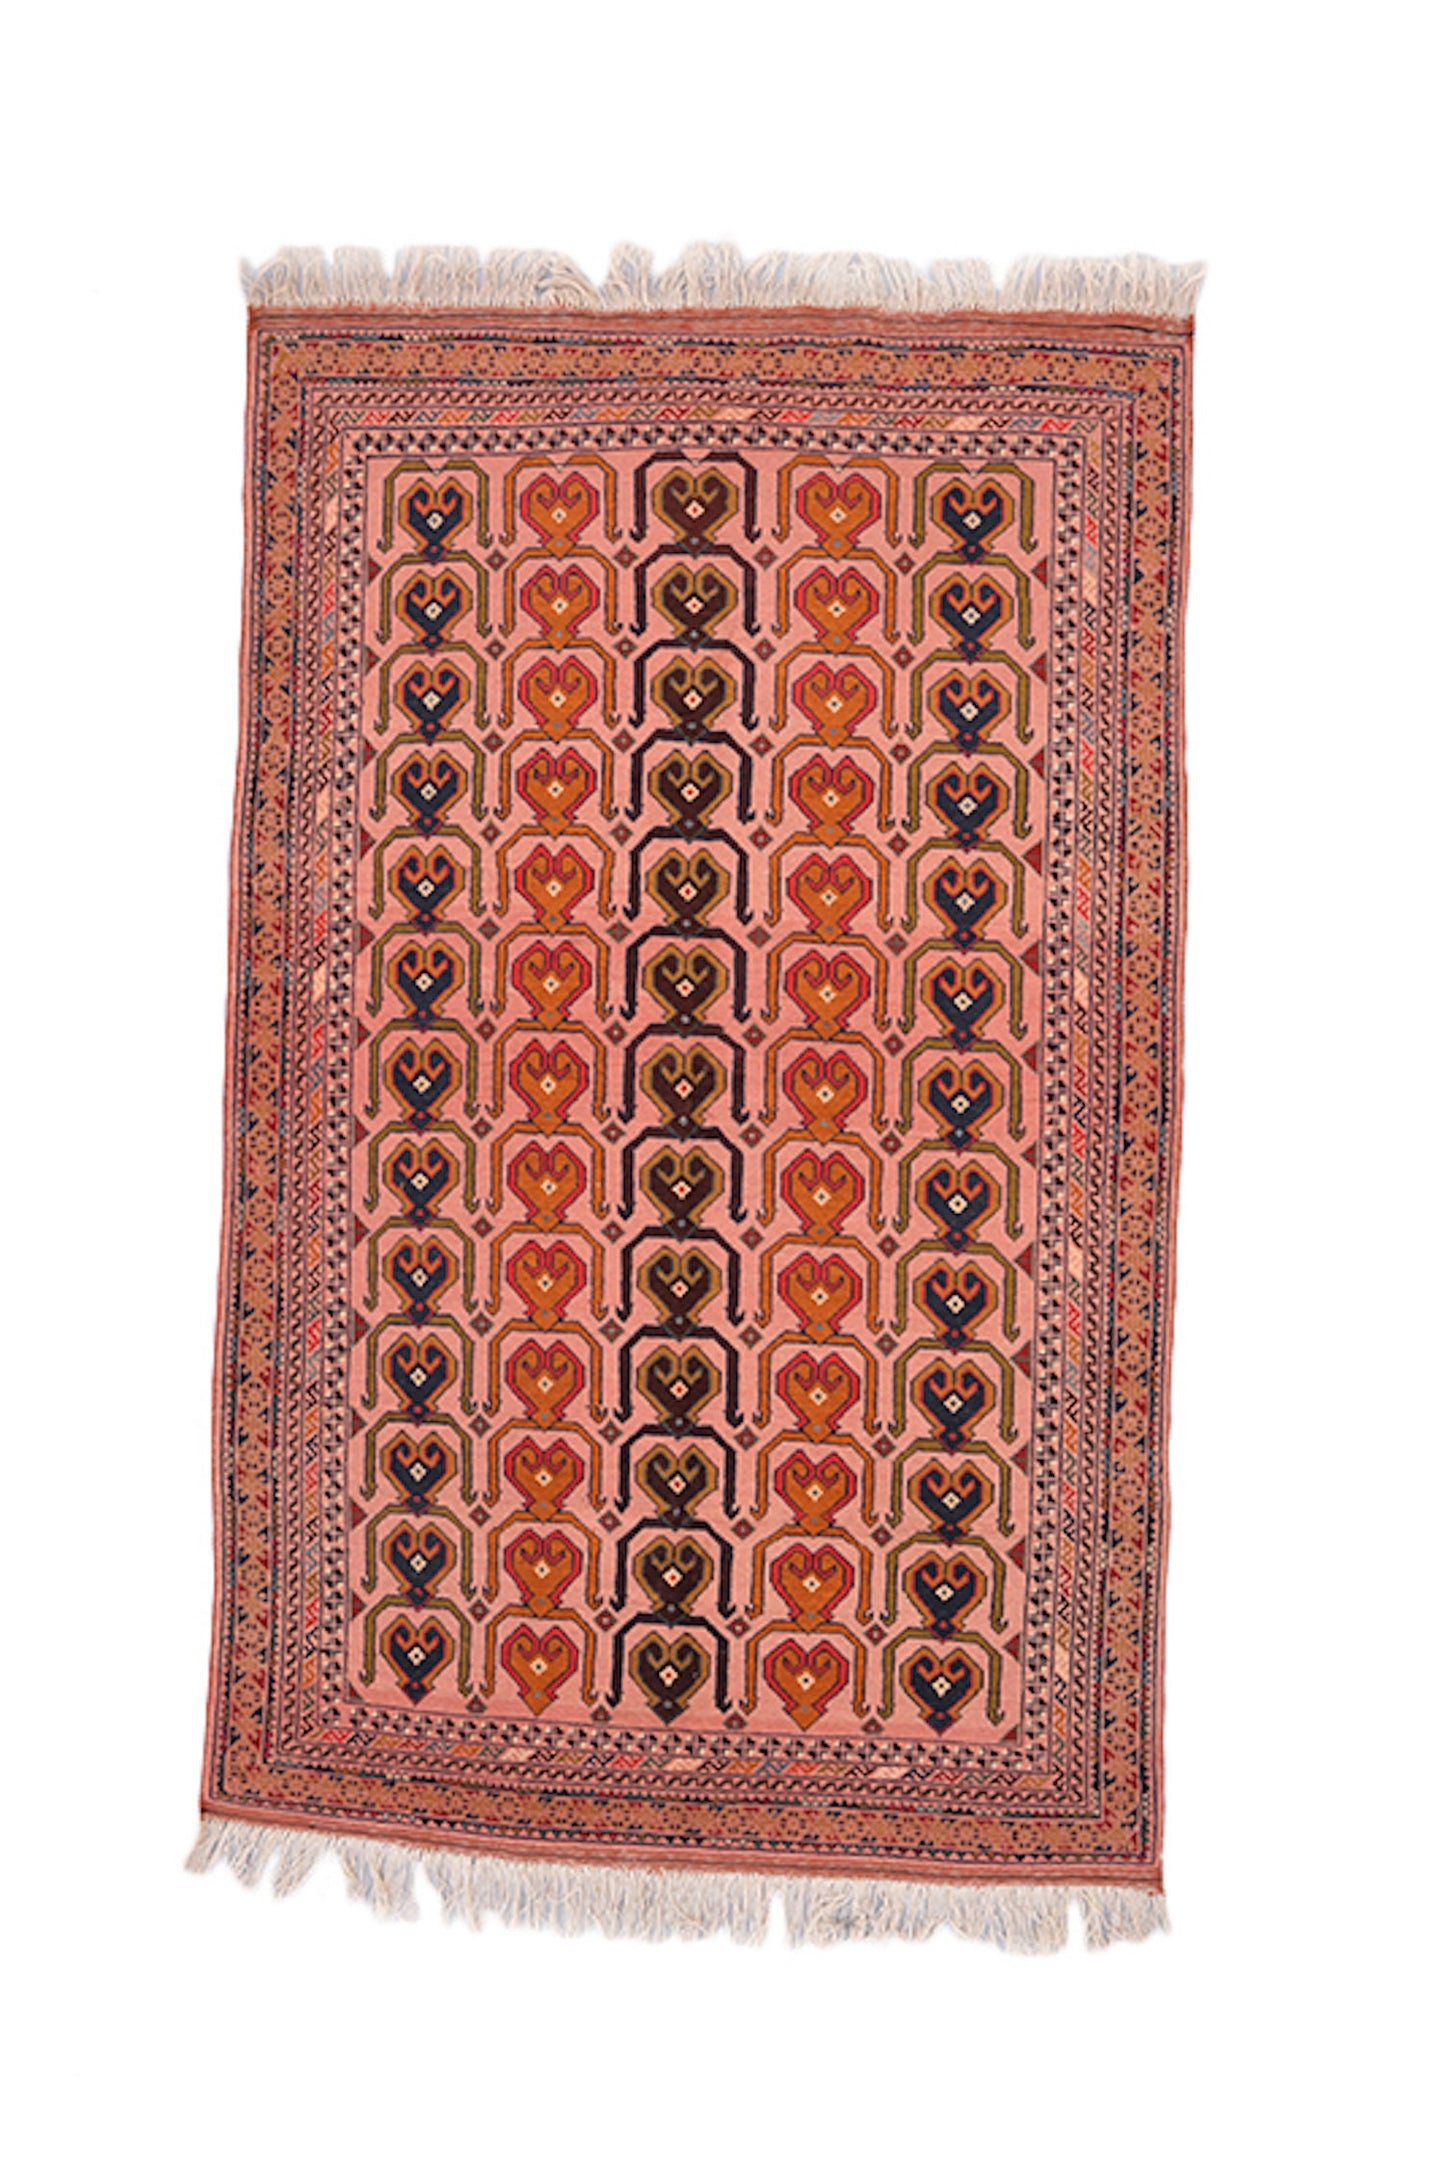 Pink Handmade Rug | Antique Area Rug | 3 x 5 Feet | Geometric Repetitive Oriental Pattern | Boho Tribal Style | Accent Rug